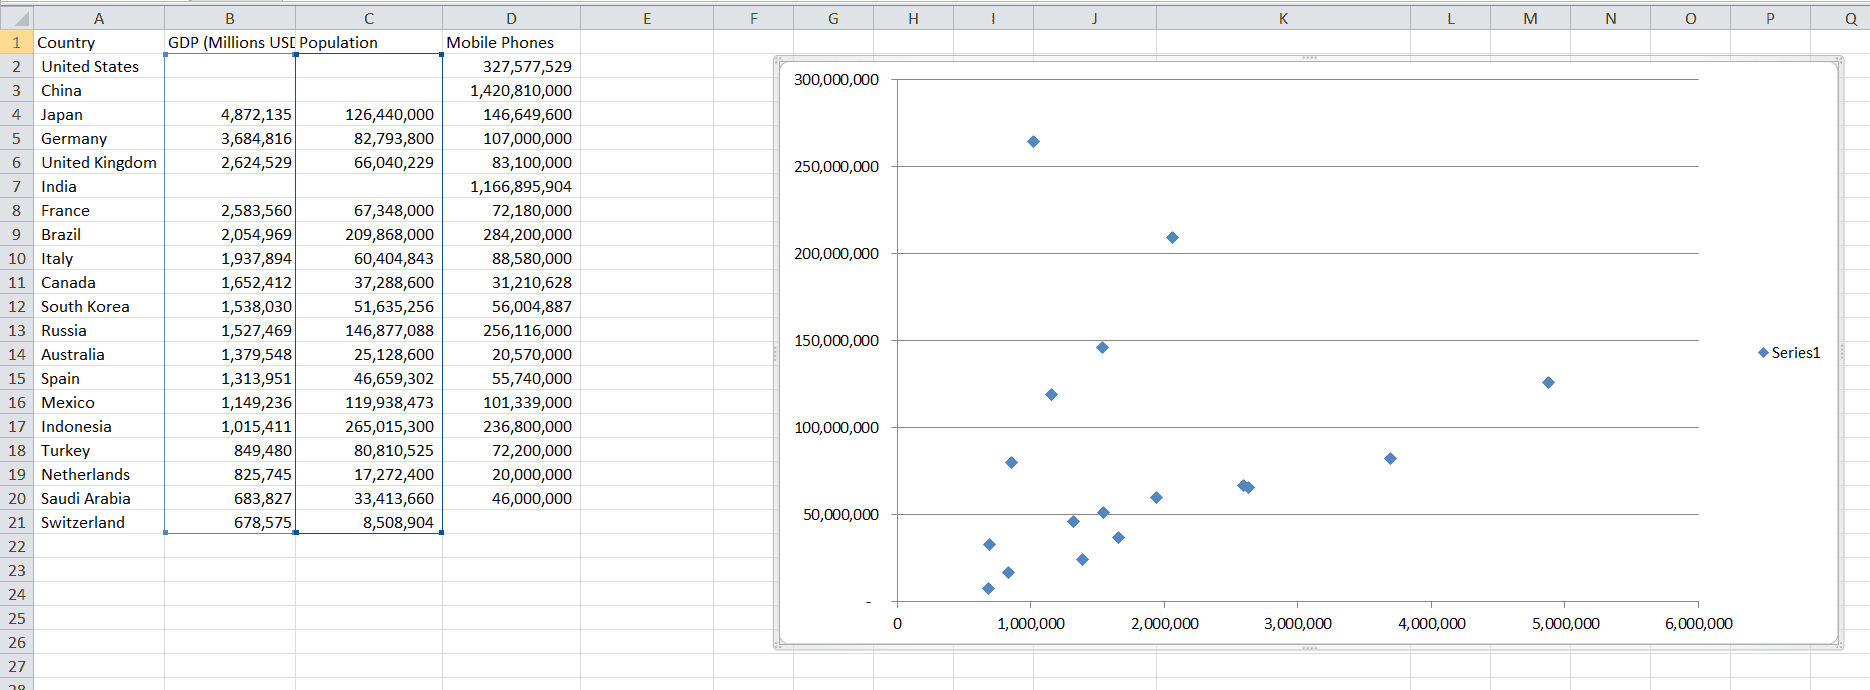 Data and Chart without outliers